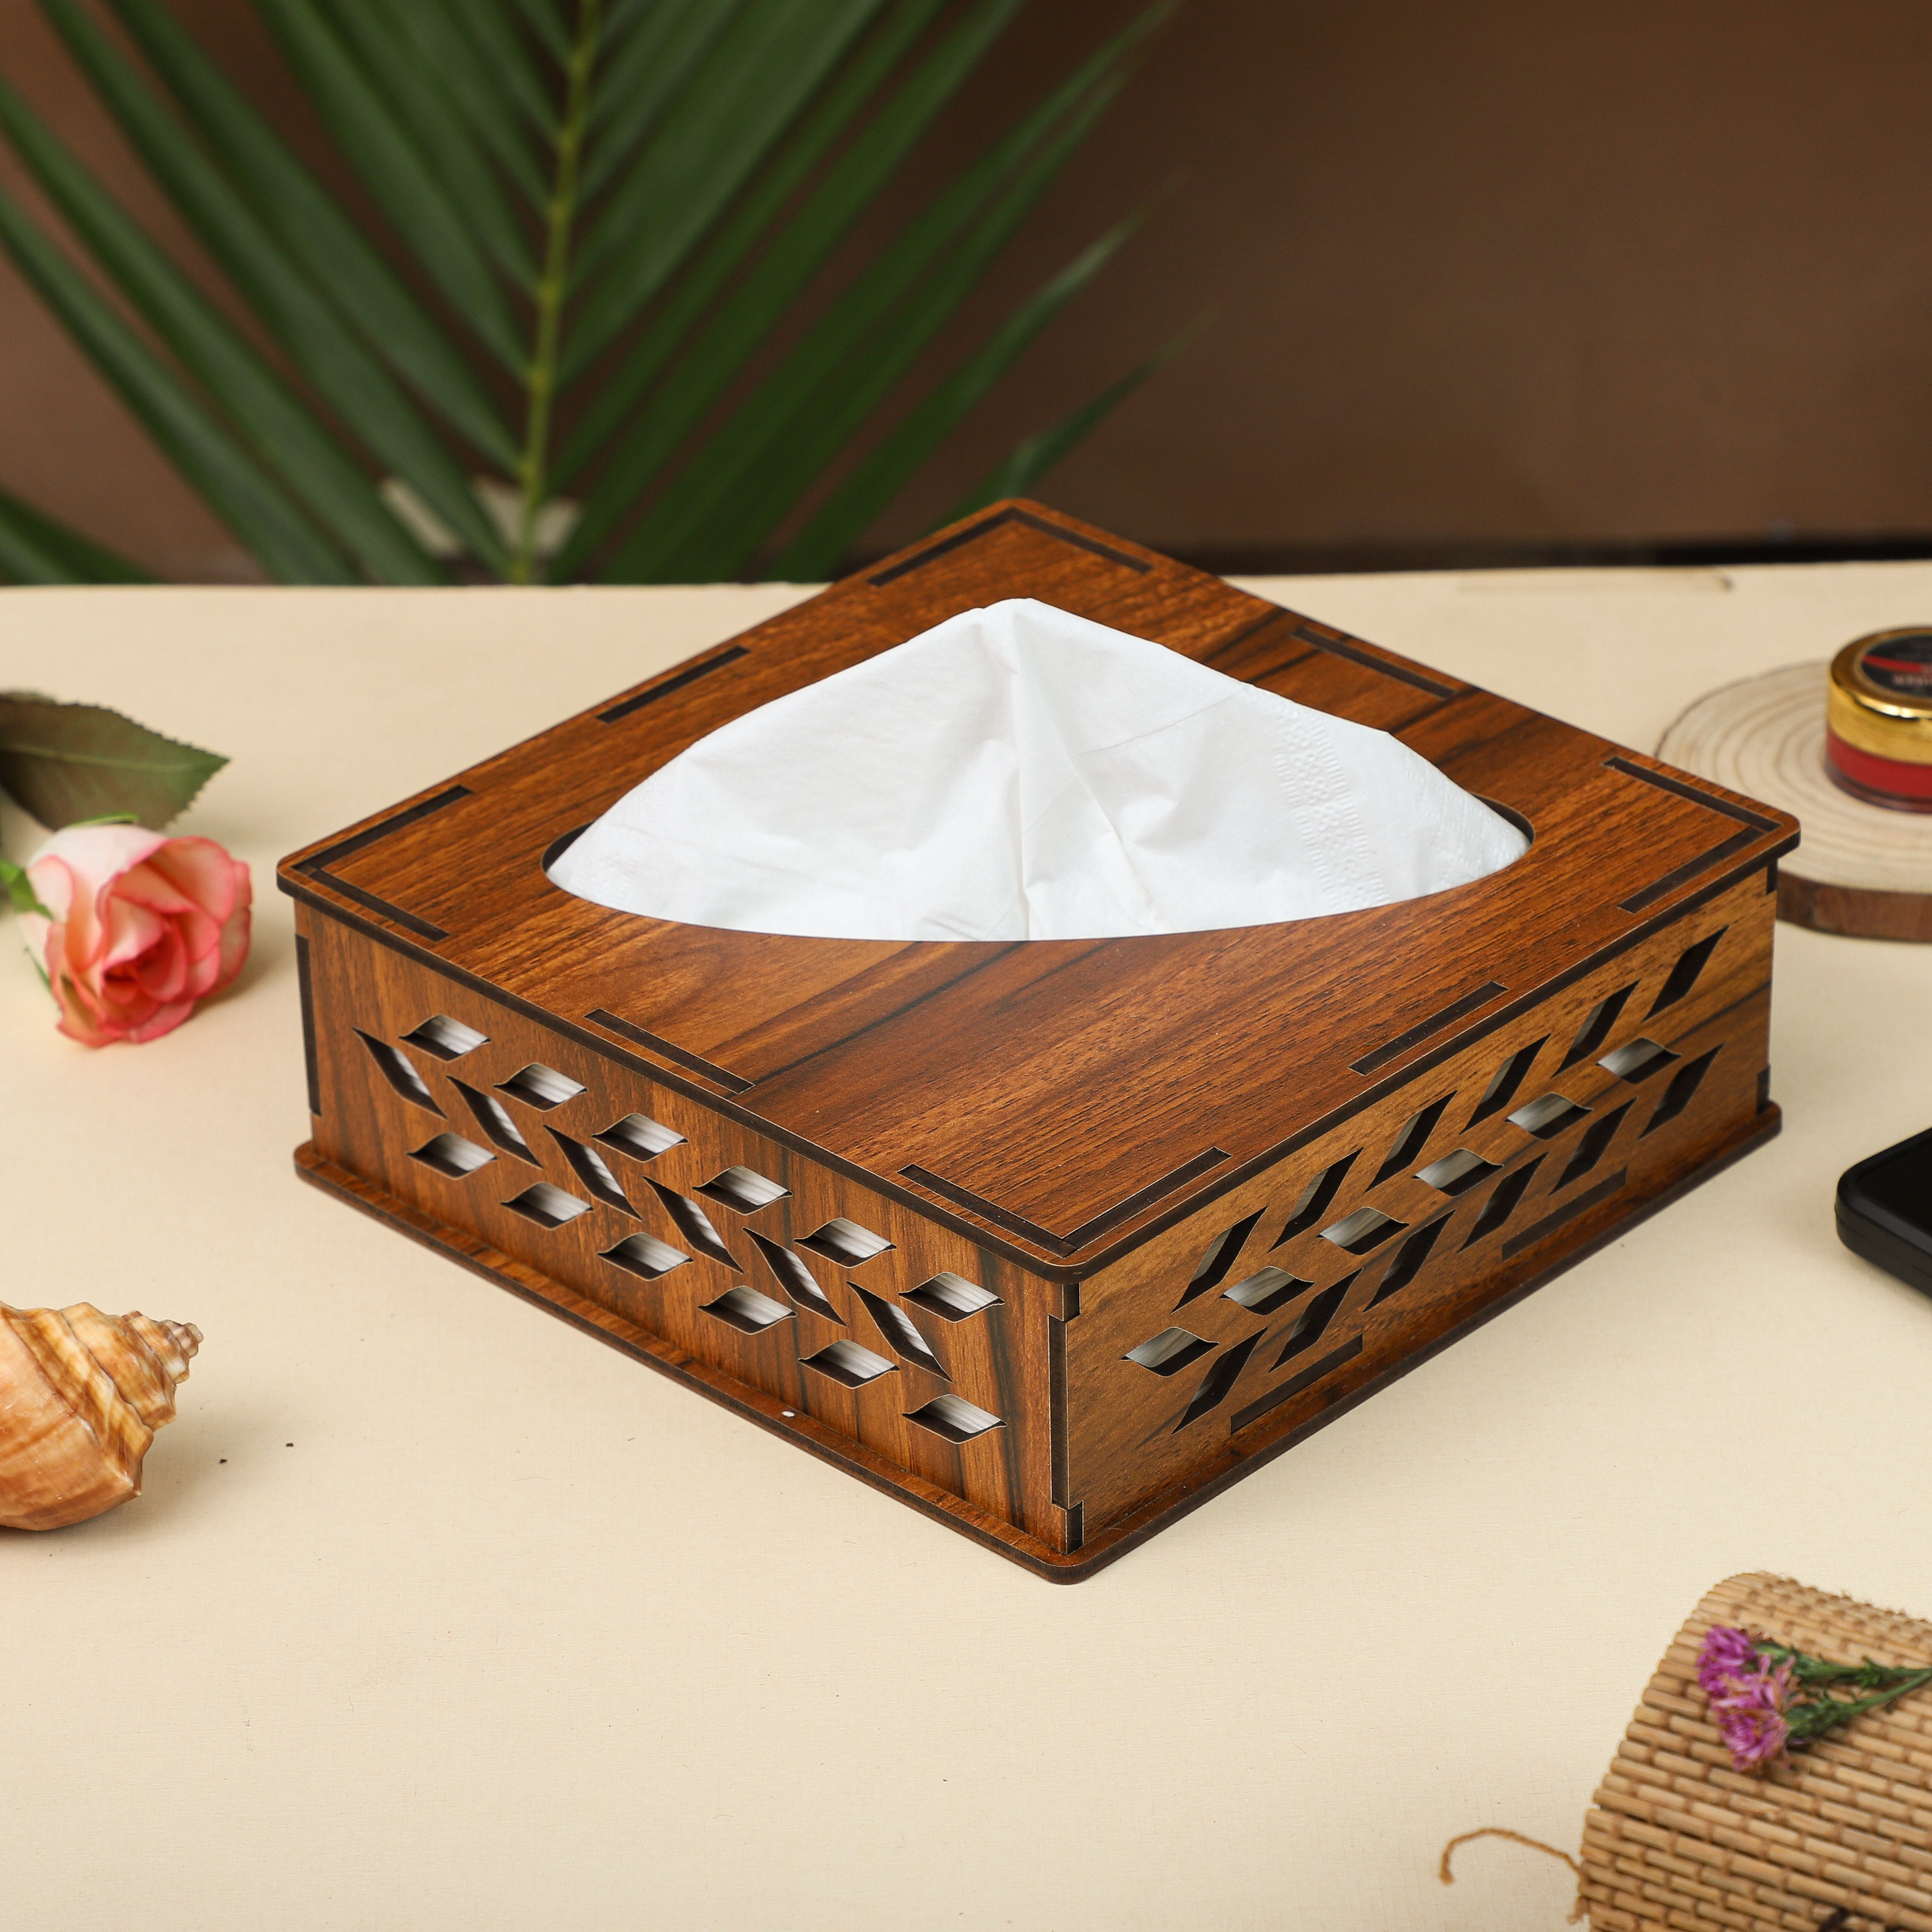 Paper Napkin Box Cover with Pack of Tissue Papers for Car, Home & Kitchen Dining Table, Resturants and Cafe